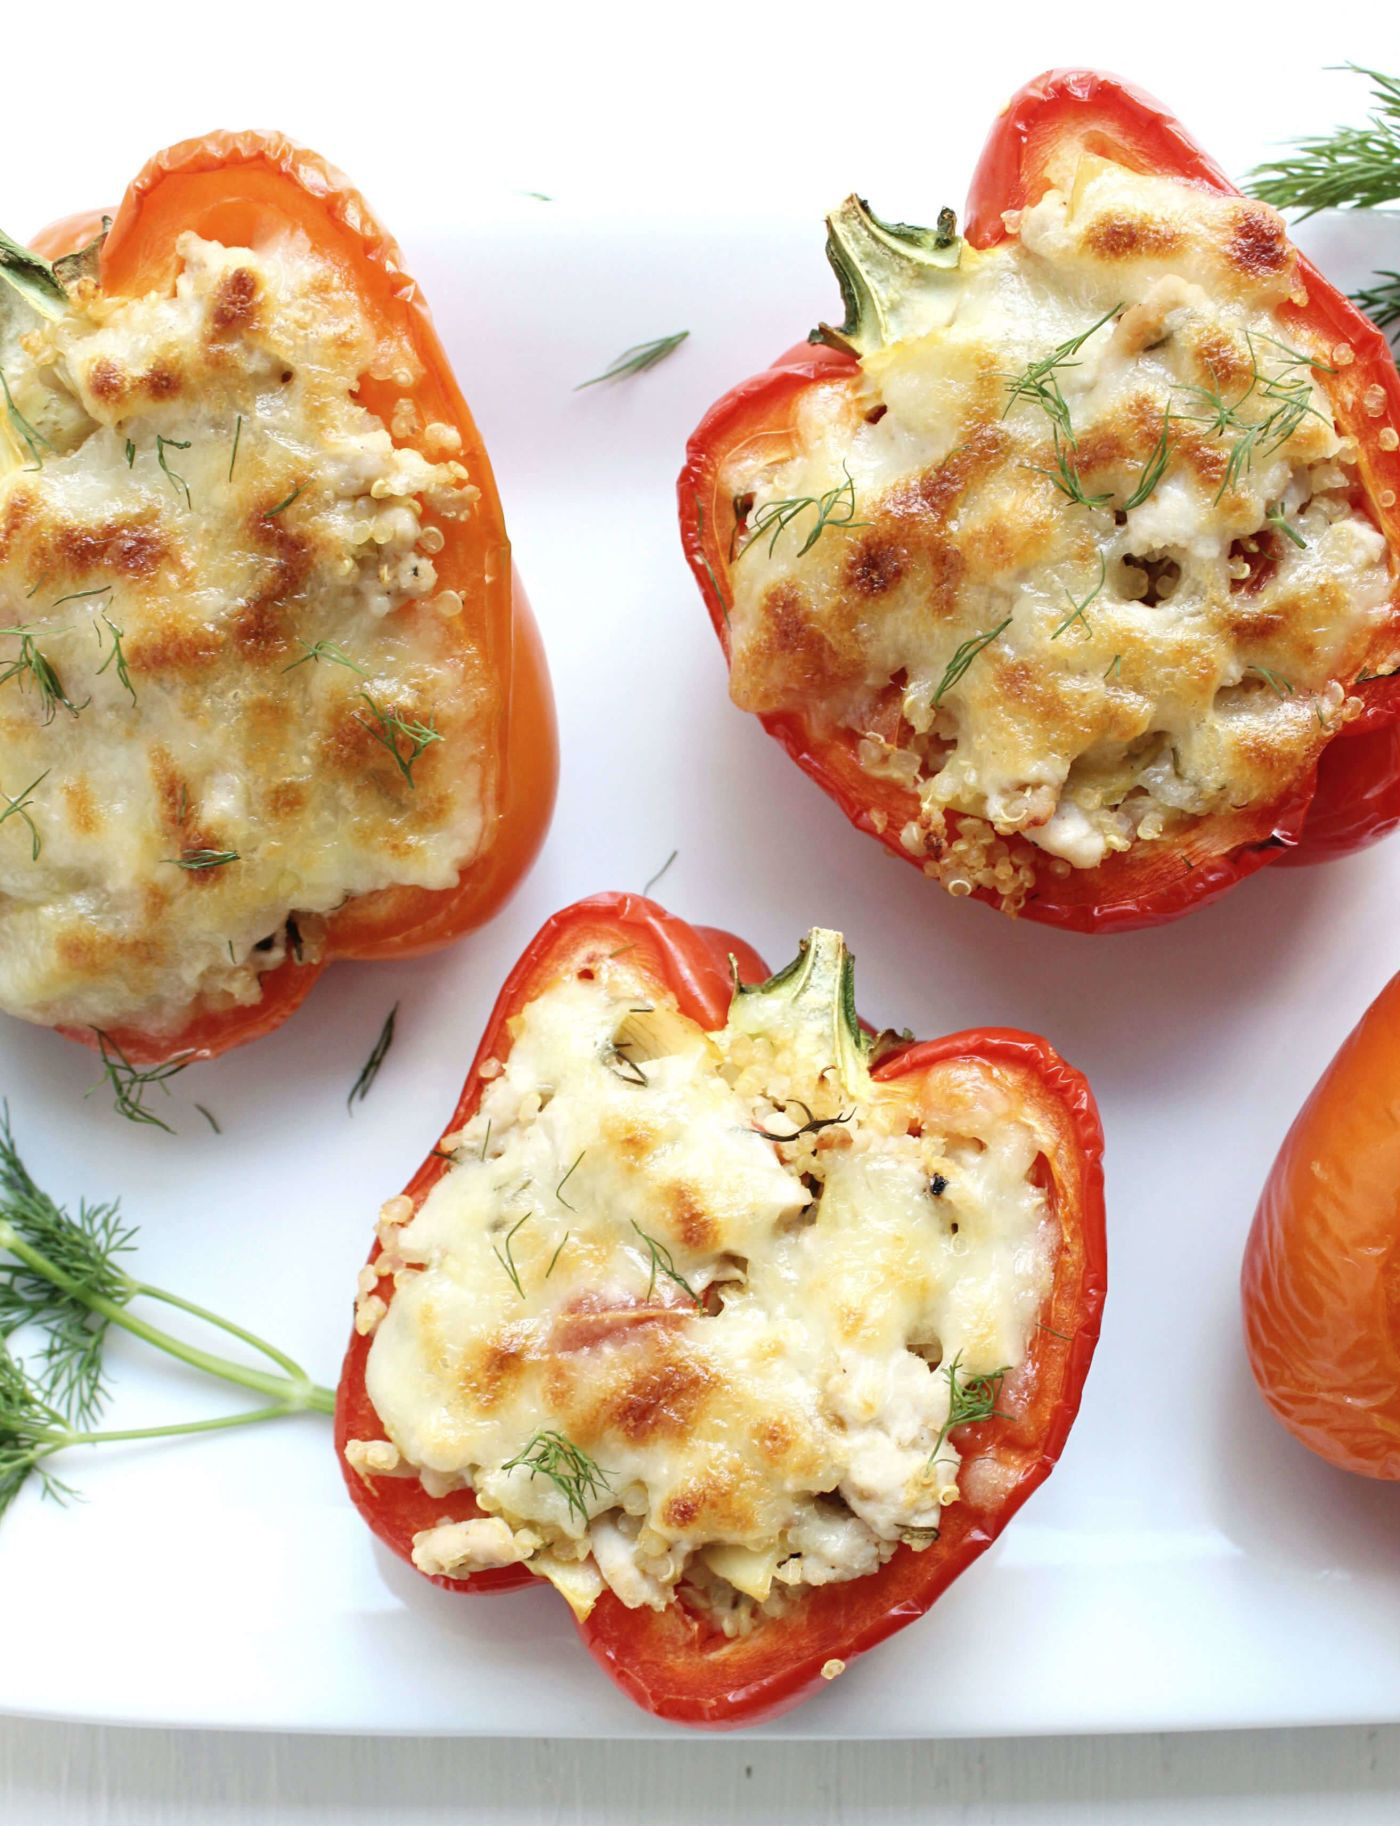 Healthy Dinner For 2
 Easy & Delicious Stuffed Pepper Recipes